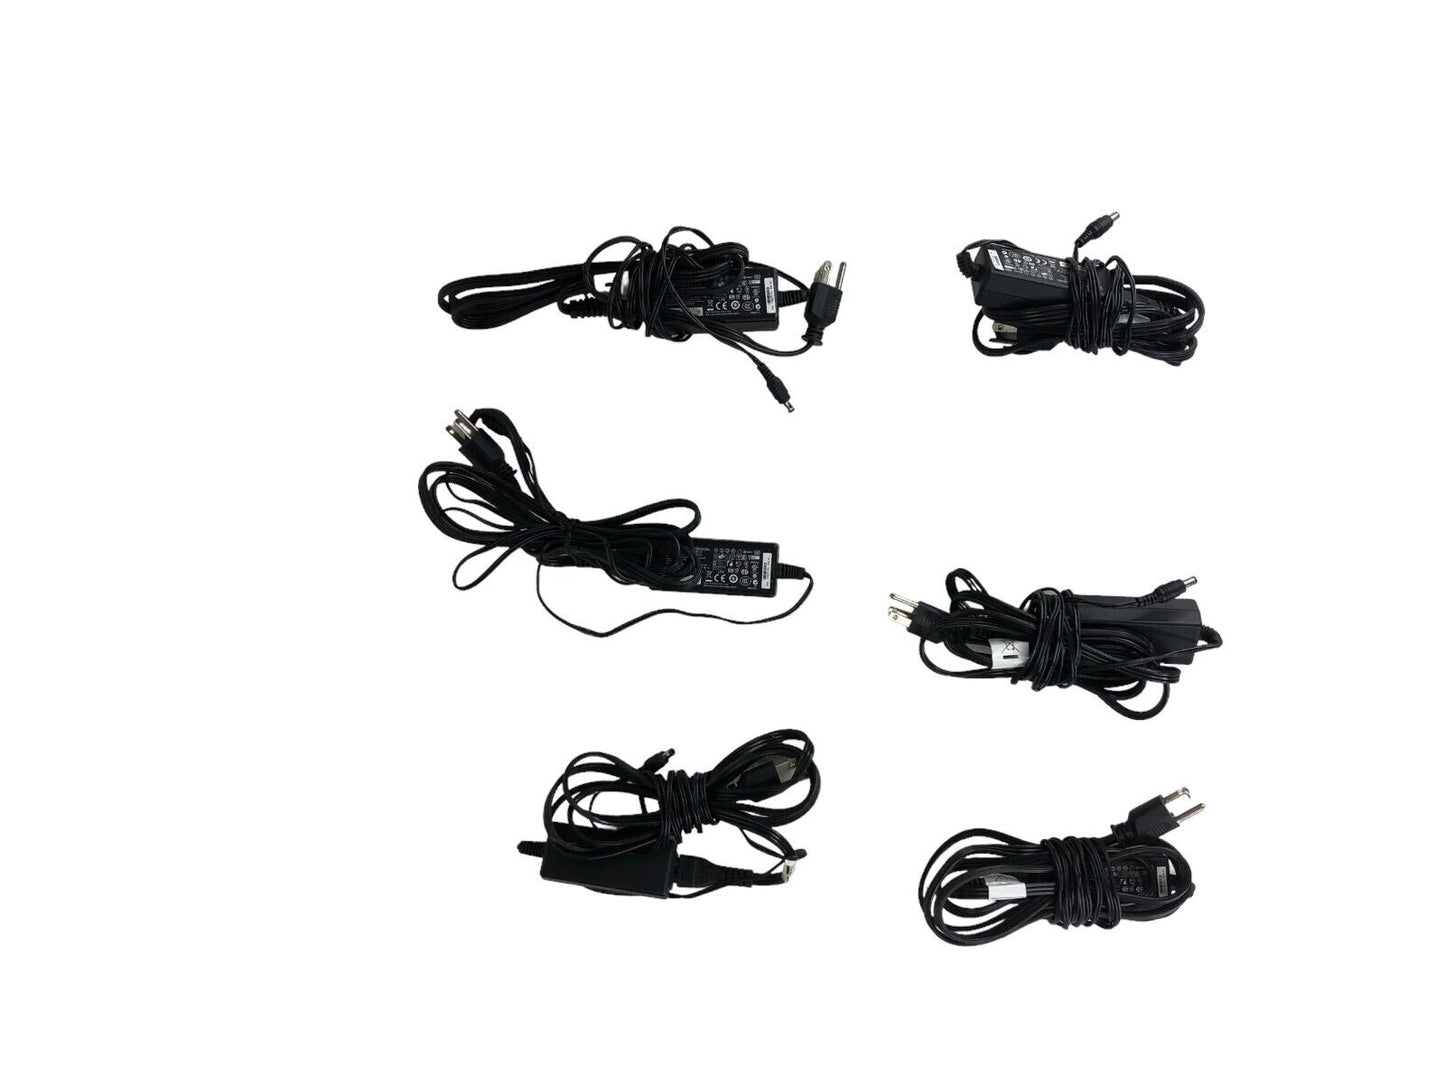 Lot Of 6 APD DA-30E12 12V 2.5A 770375-31L  AC Adapter charger